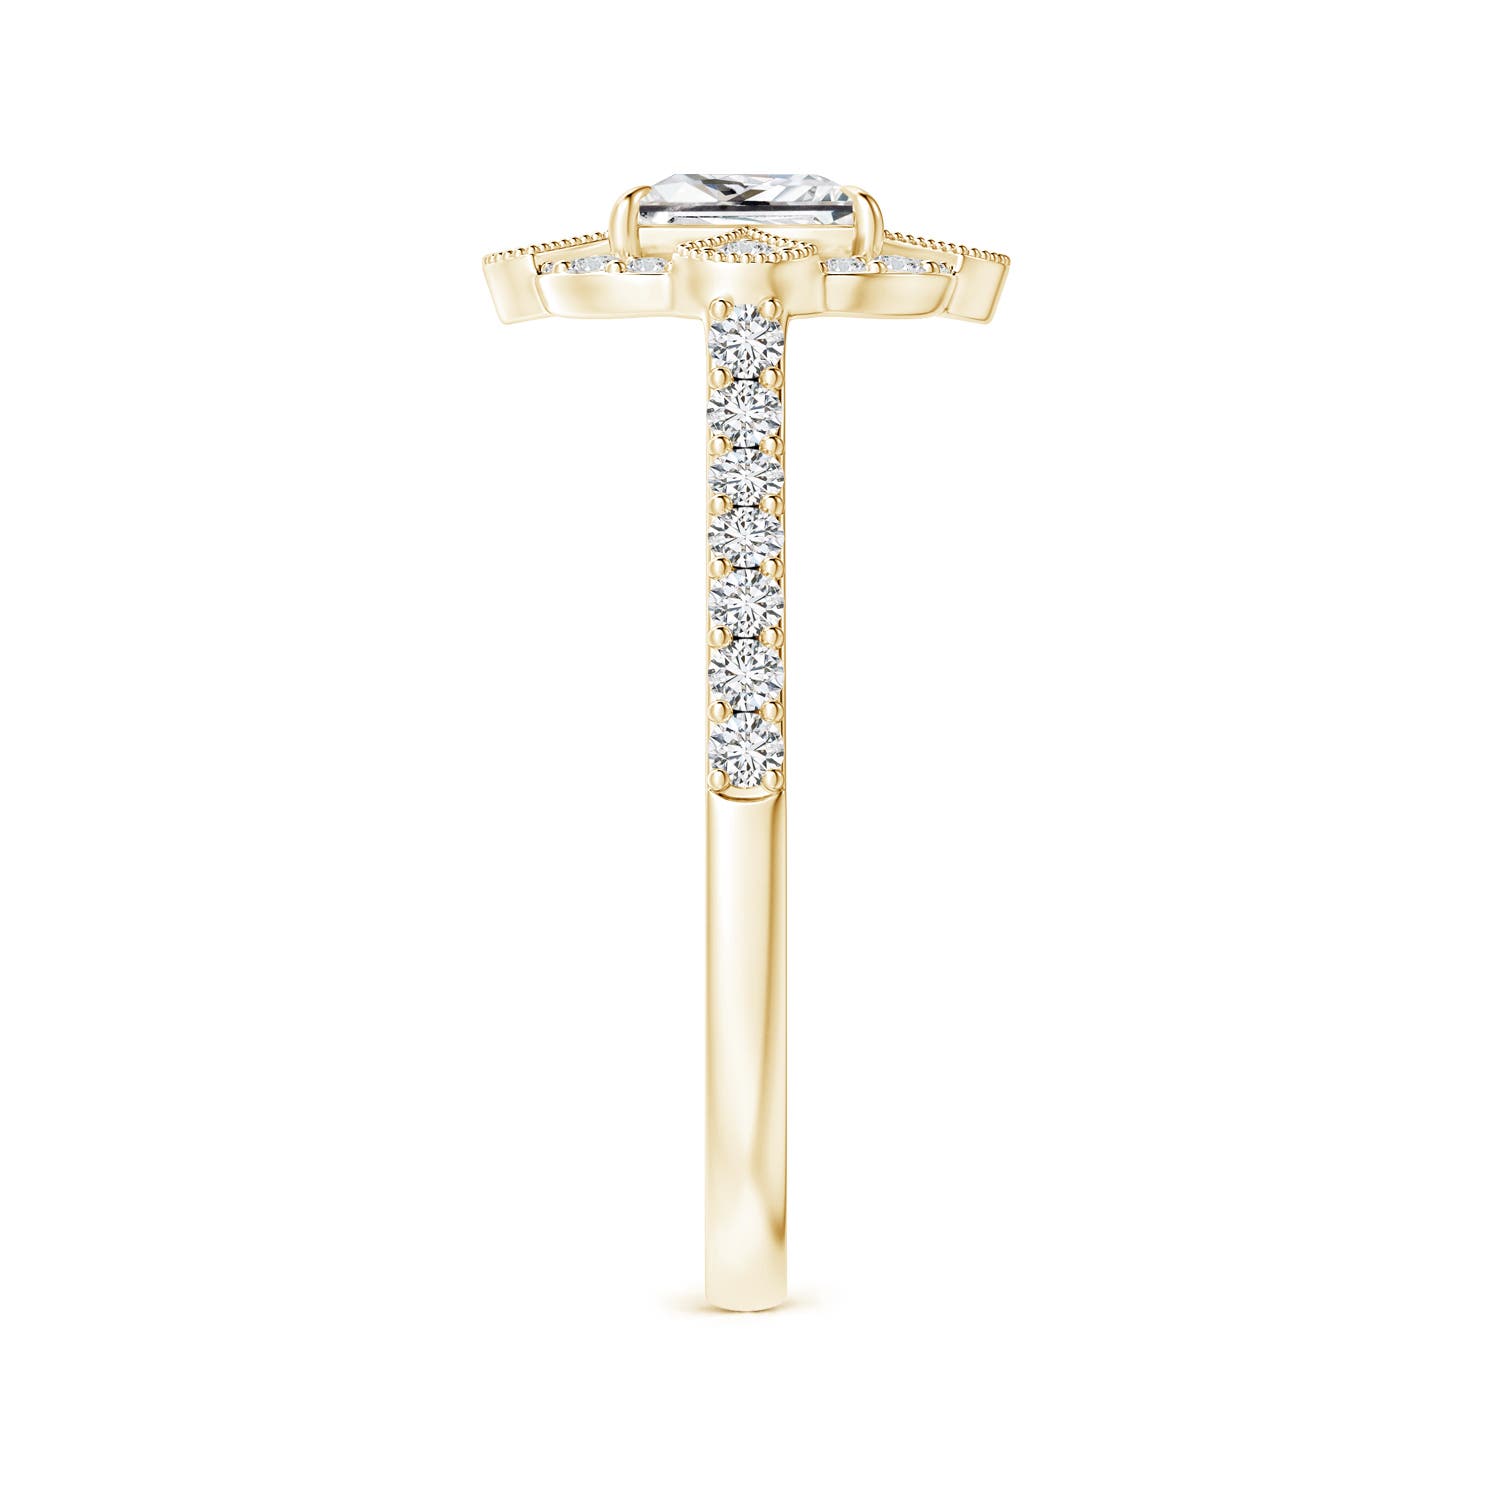 H, SI2 / 1.17 CT / 14 KT Yellow Gold